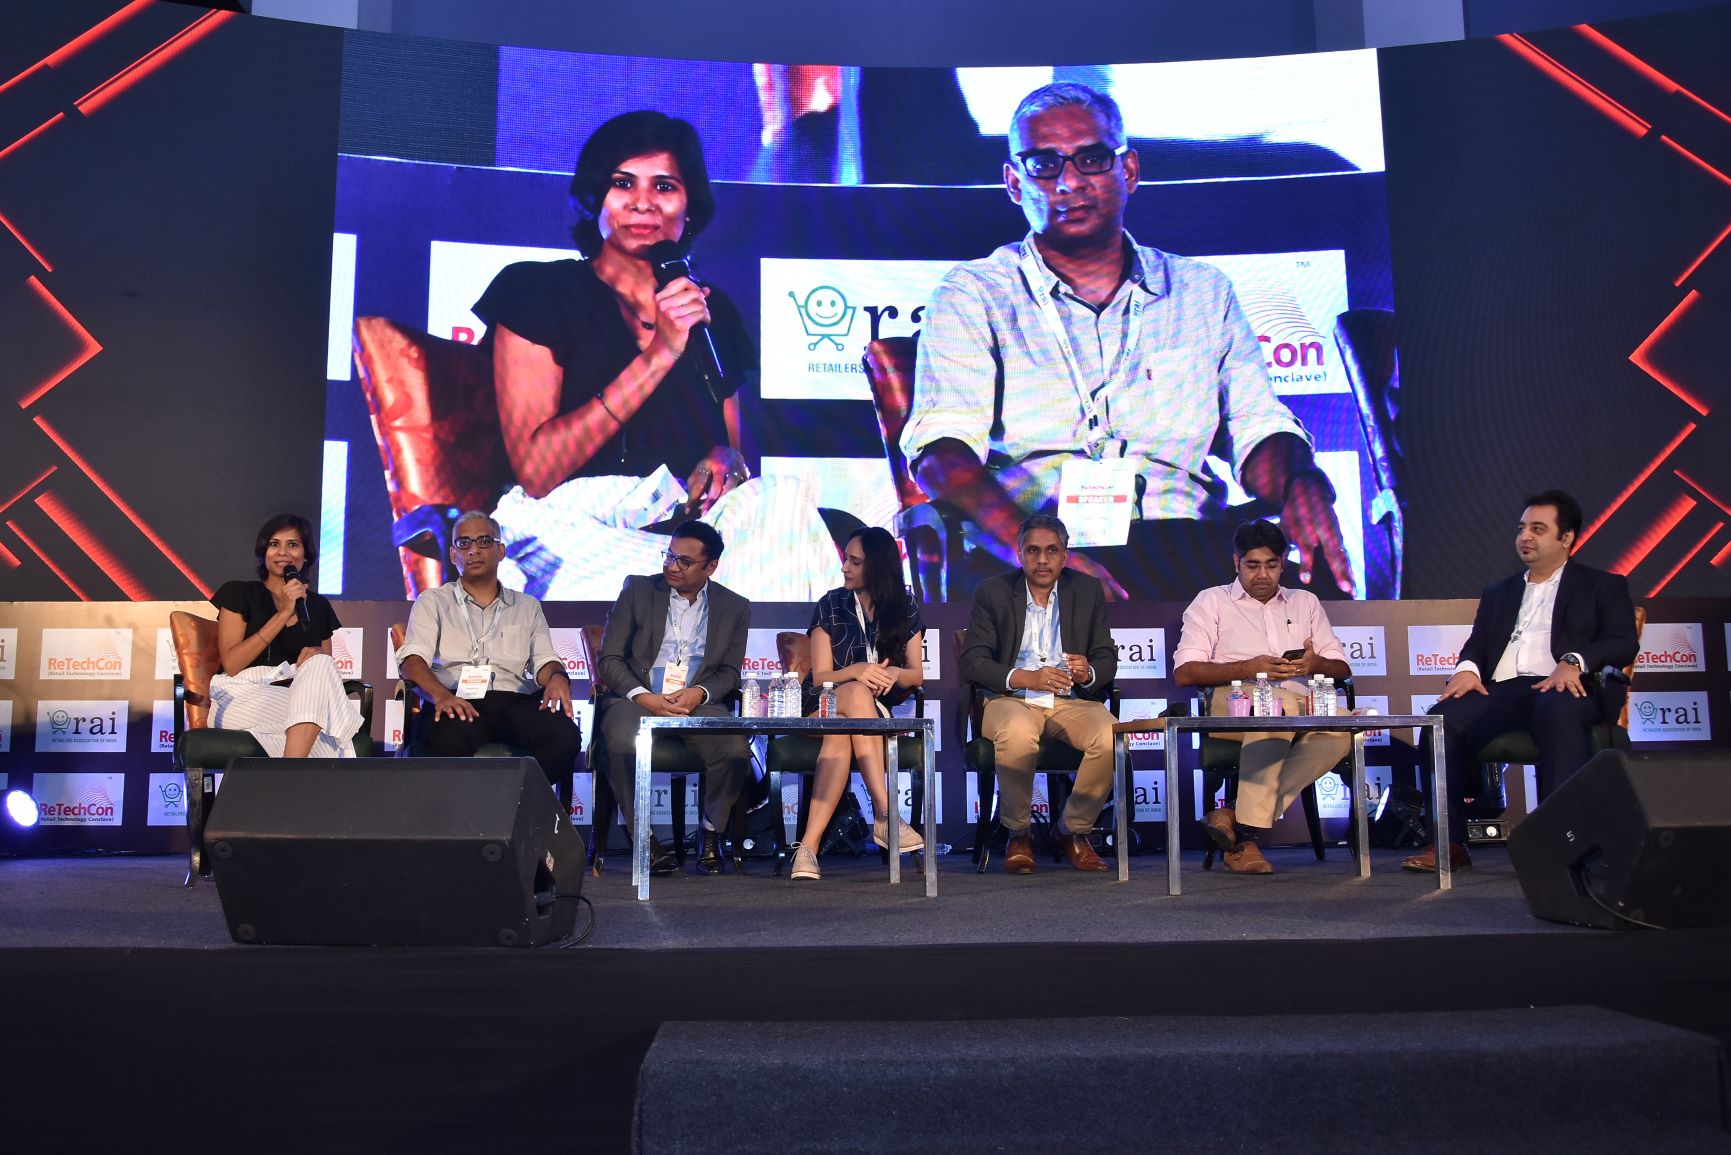 Day 2 - ReTechCon 2019 Speakers: (From L-R) 1:  Kaveri Misra, Industry Strategist, Adobe Systems 2: Abhimanyu Lal, Chief Product Officer & Business Head, Pepperfry 3: Arvind R P, Director – Marketing & Communications, McDonalds India (West and South) 4: Monica Singh, Head Marking & PR, Bestseller Retail India Pvt. Ltd. (Vero Moda, Jack & Jones, ONLY) 5: Rajiv Nair, CEO, Kaya Ltd. 6: Vivek Kapoor, Co- Founder, Dineout and 7: Vishwajeet Sukhija, Subsidiary Lead, Business Apps, Microsoft - Photo By Sachin Murdeshwar GPN